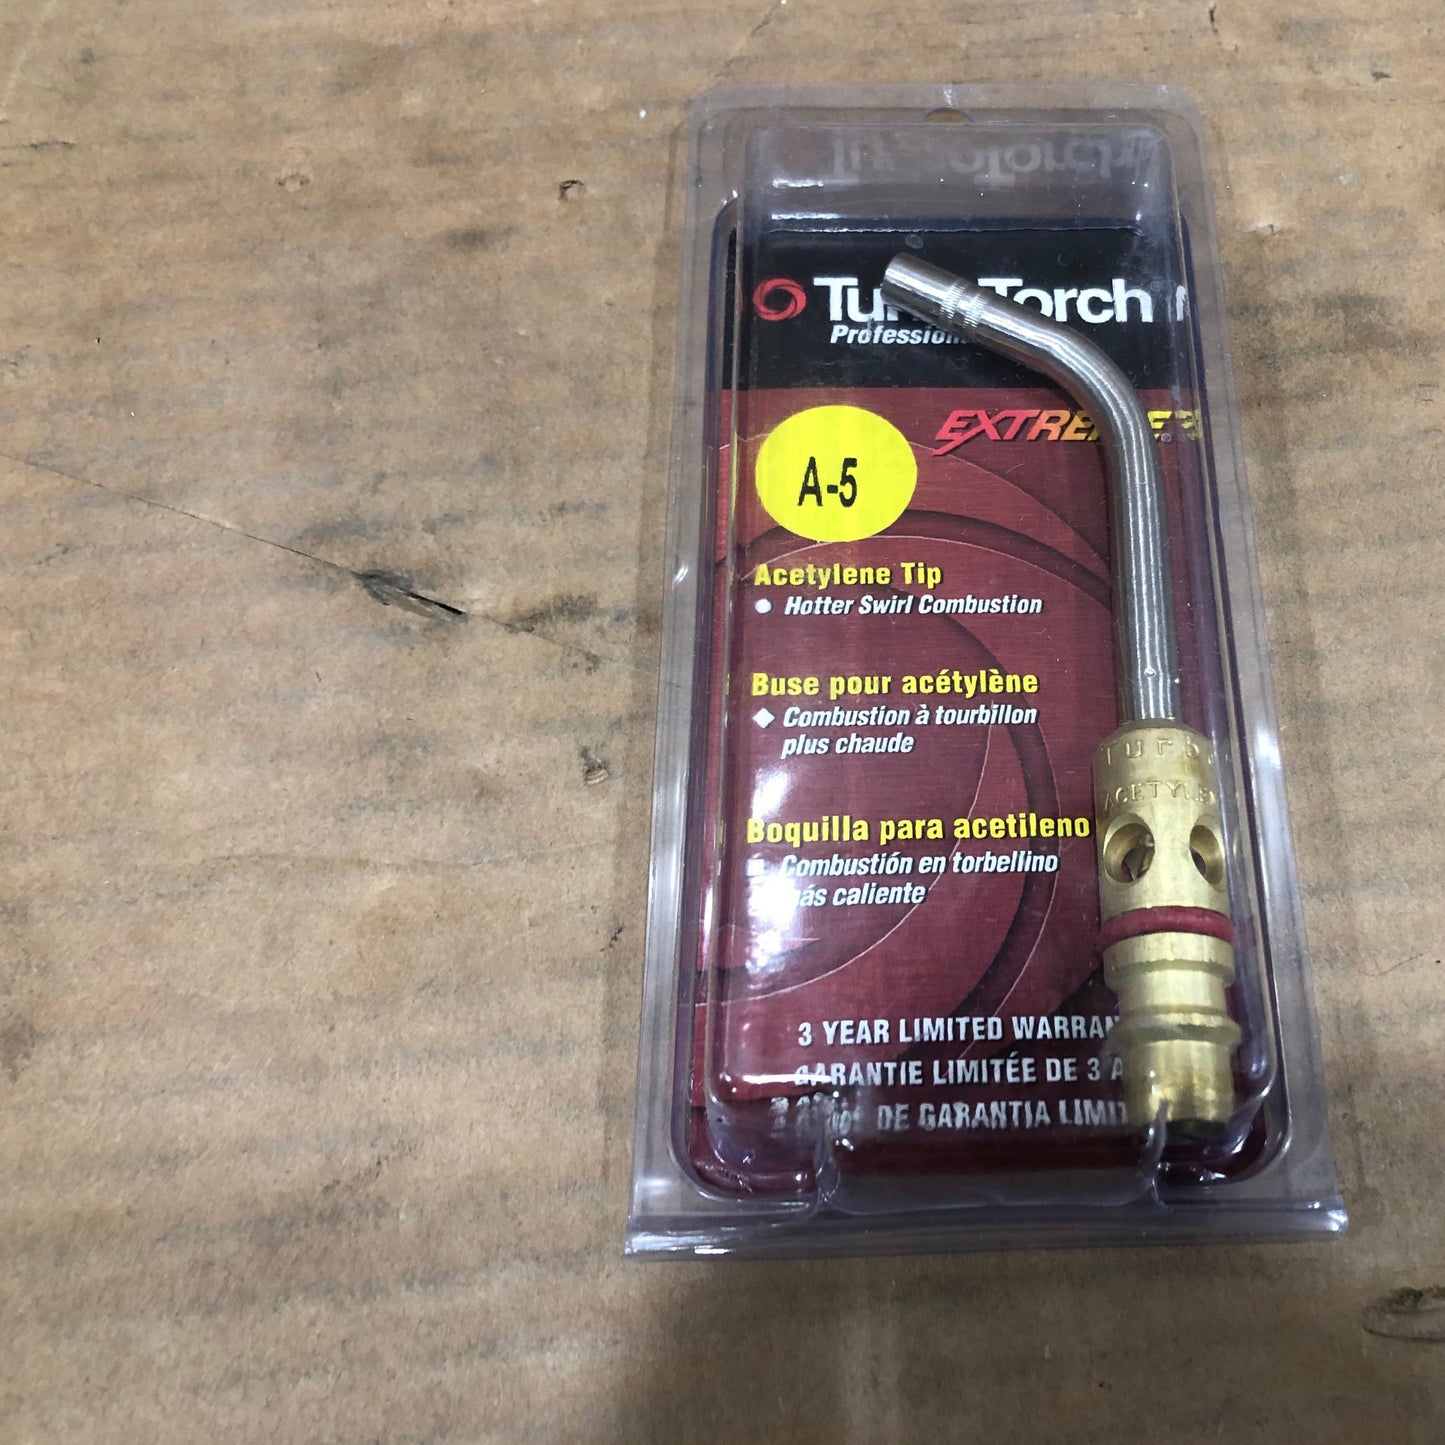 A-5 TURBO TORCH ACETYLENE TIP